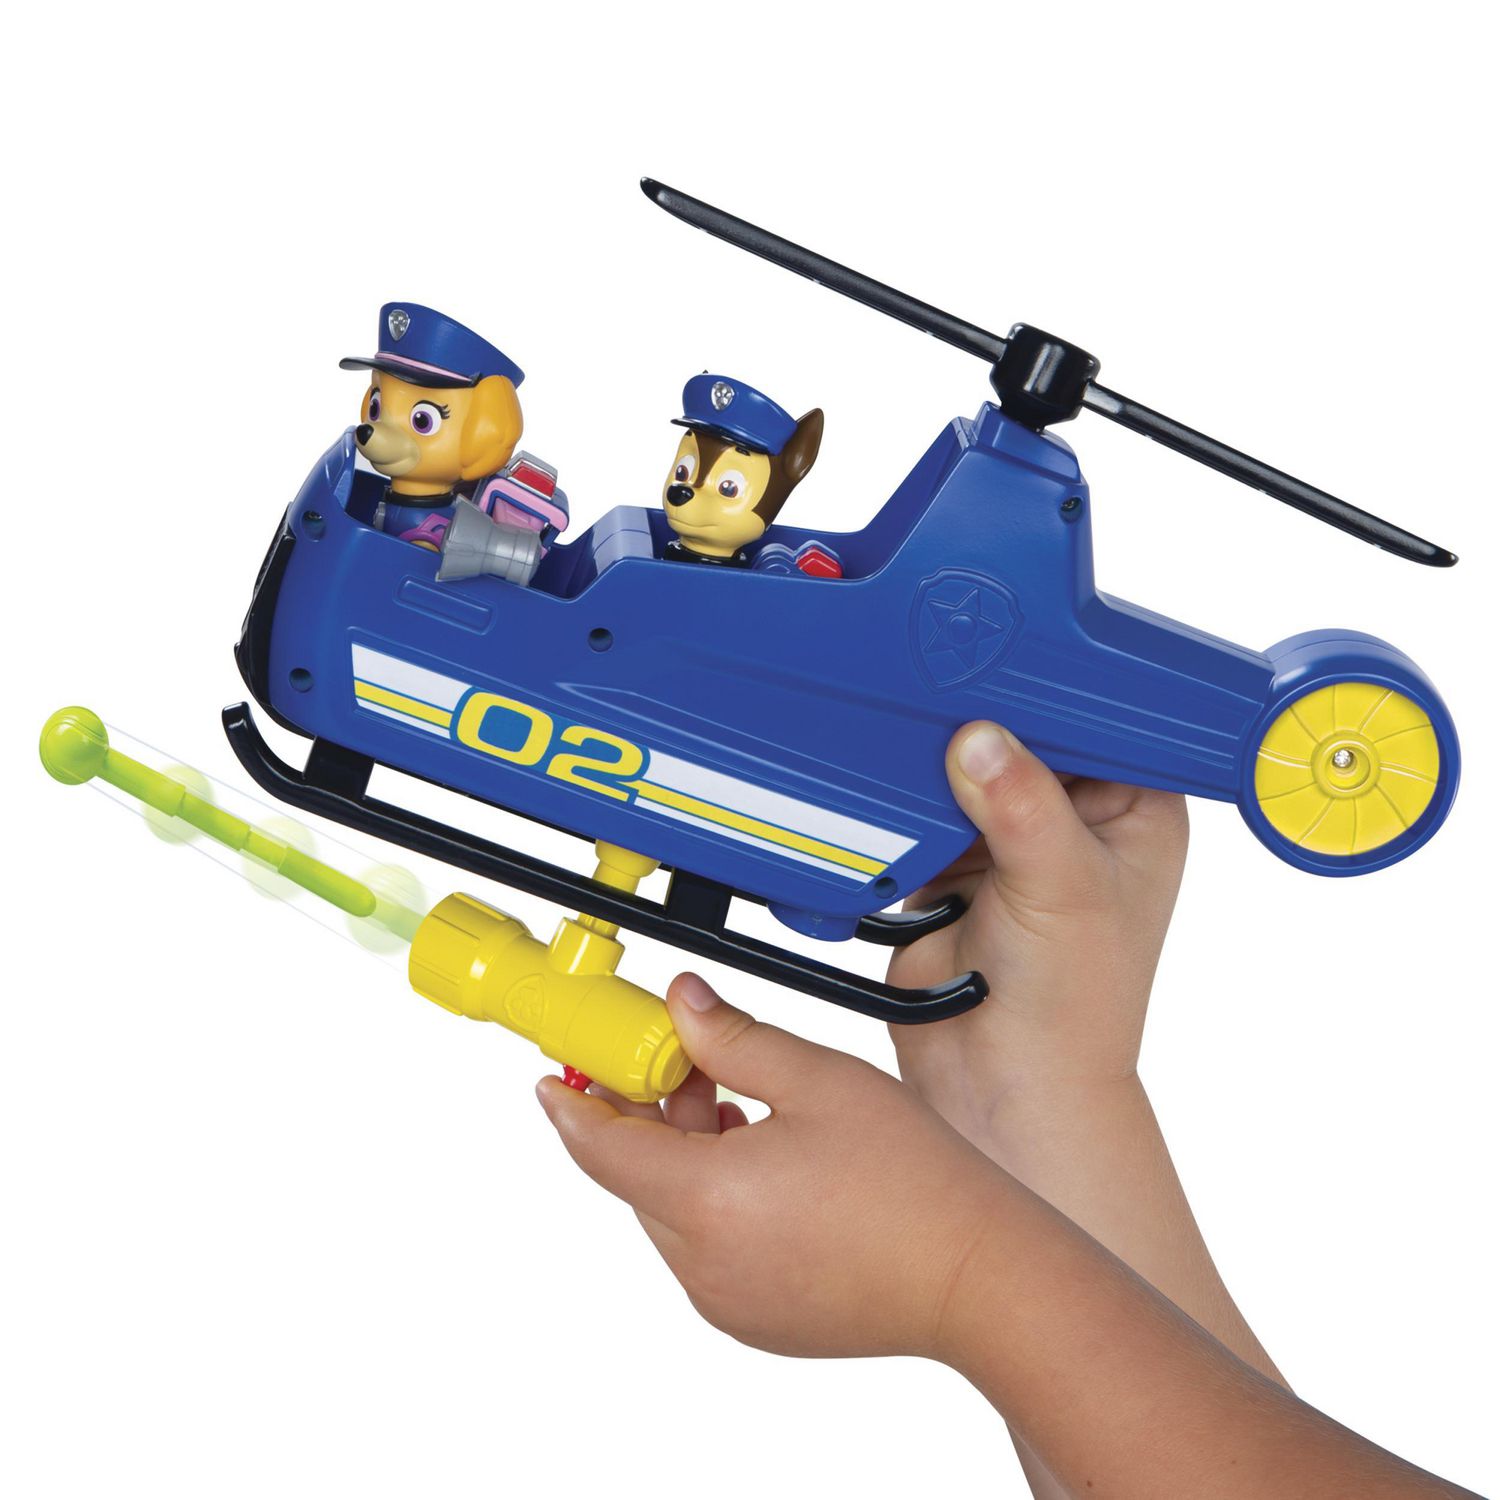 PAW Patrol, Chase’s 5-in-1 Ultimate Cruiser